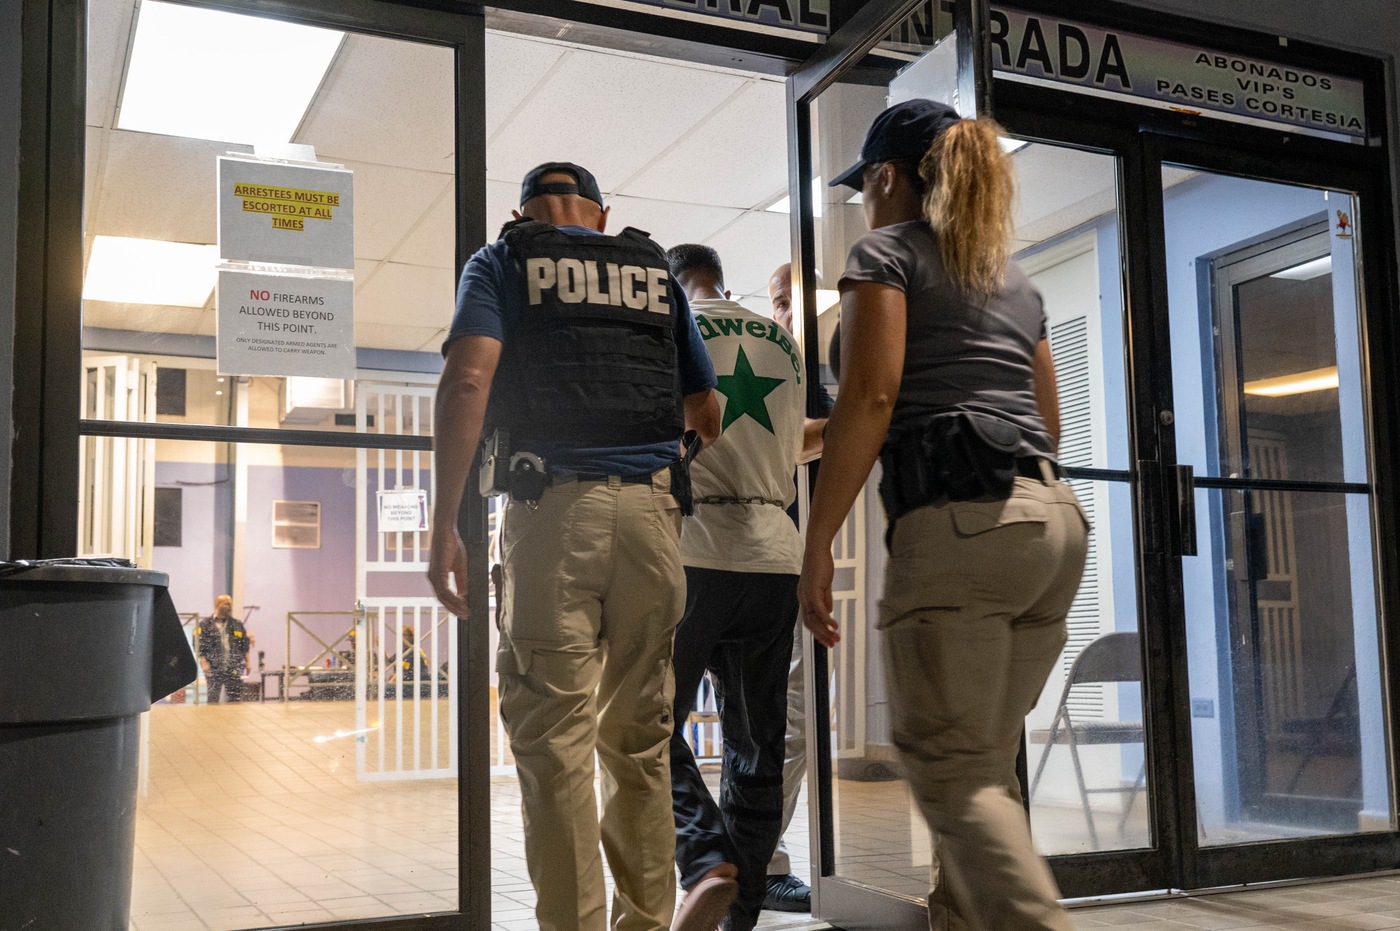 An investigation led by the FBI, with the assistance of several local and federal organizations, has resulted in the arrests and indictments of dozens of members of a violent drug trafficking gang, Los 1,500, based in San Juan, Puerto Rico.